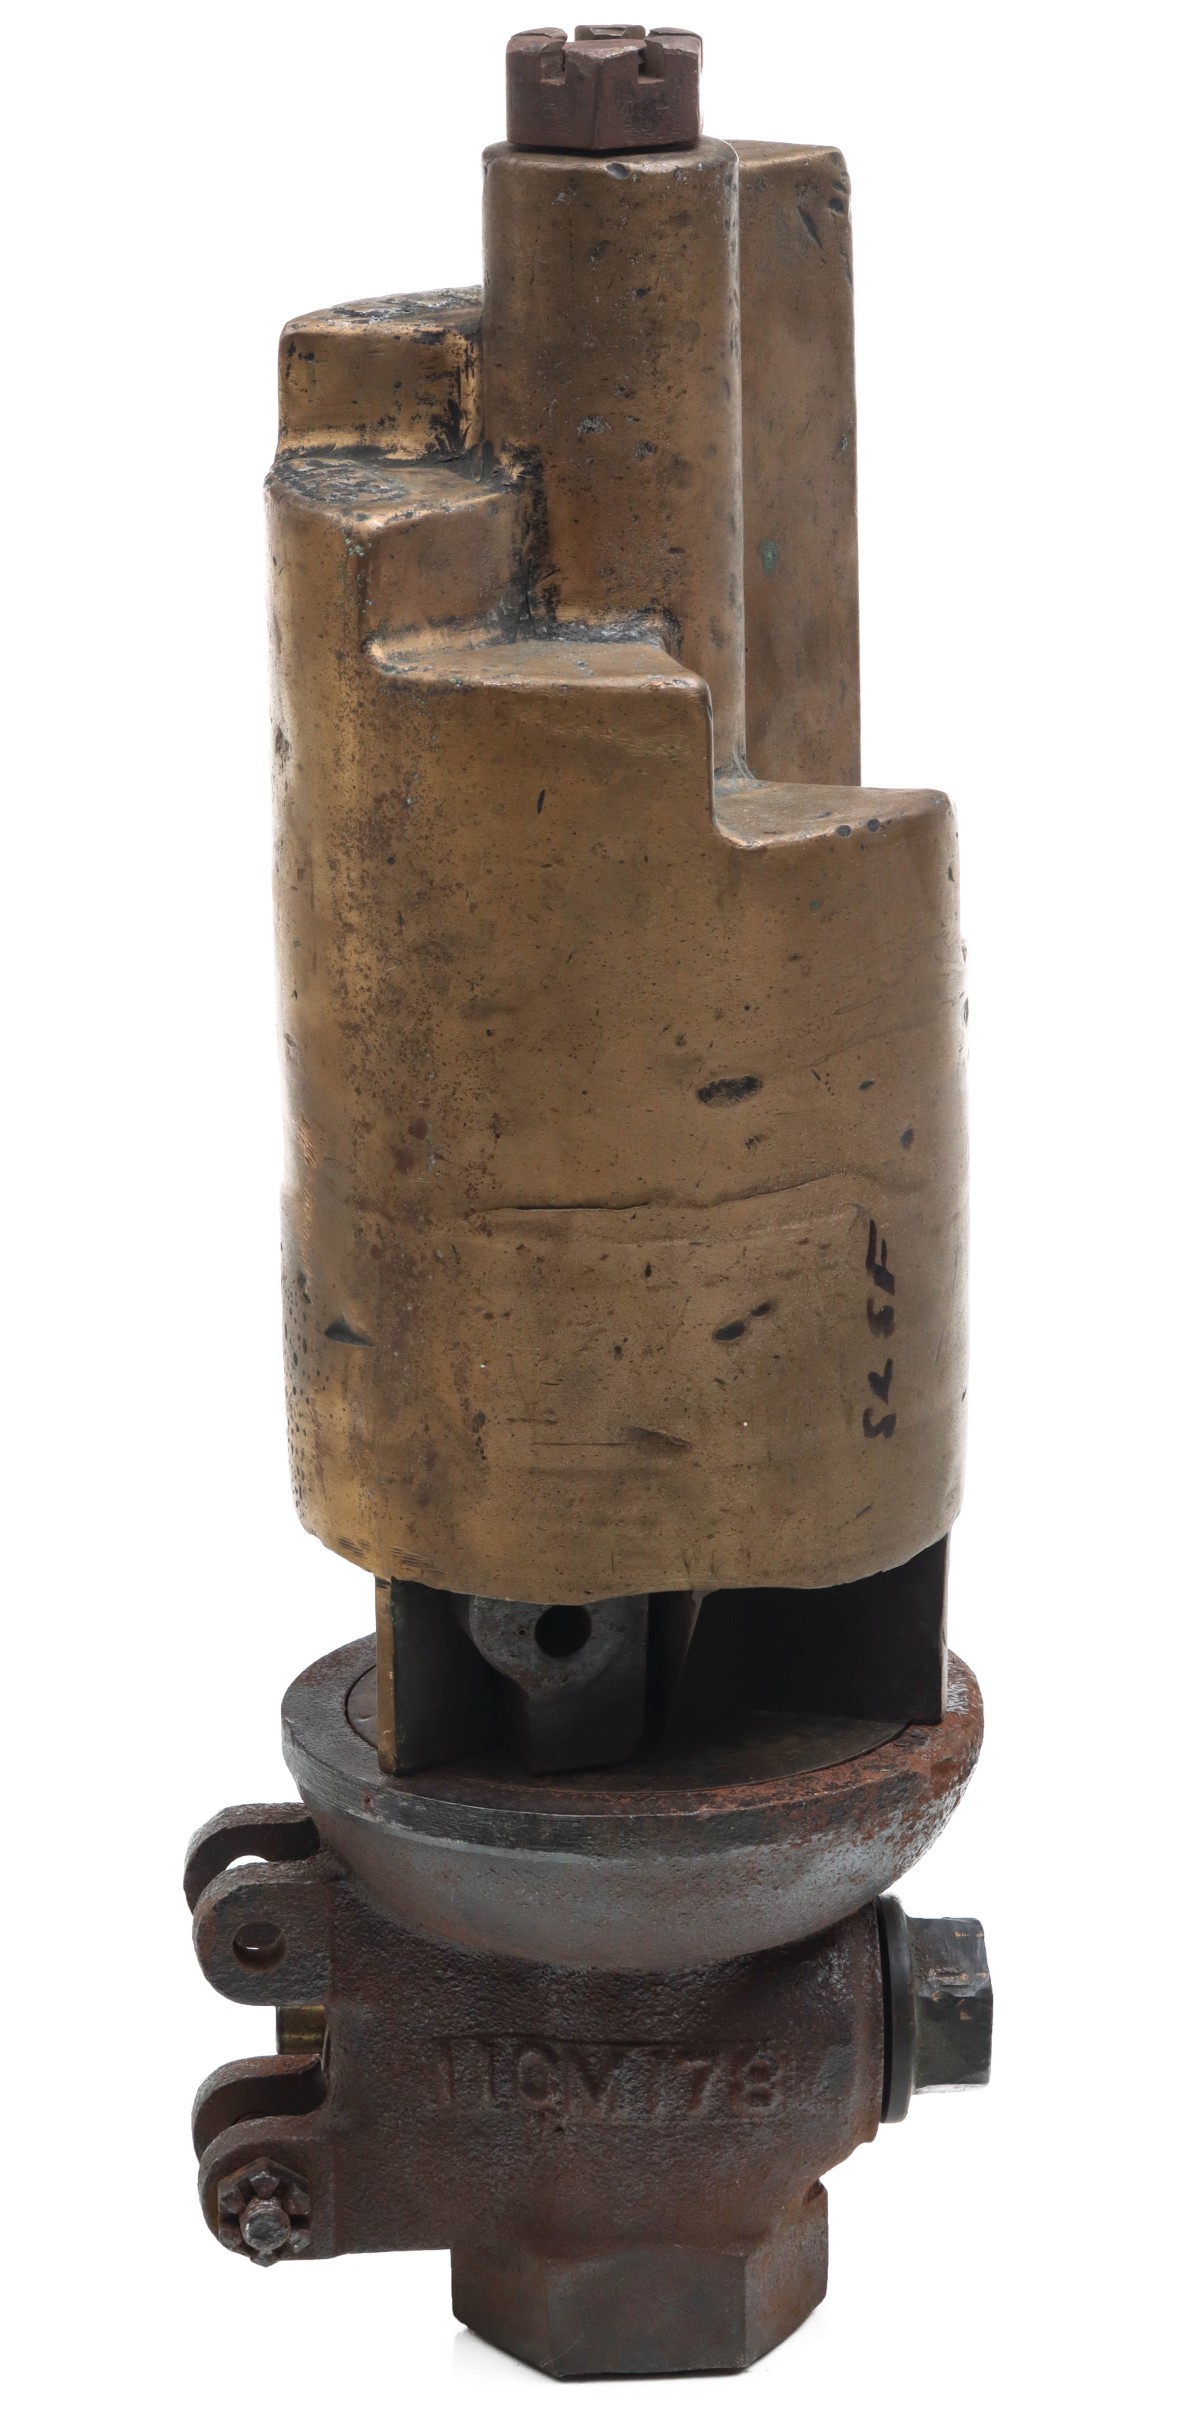 A SIX CHIME BRASS LOCOMOTIVE WHISTLE ATTRIBUTED FRISCO